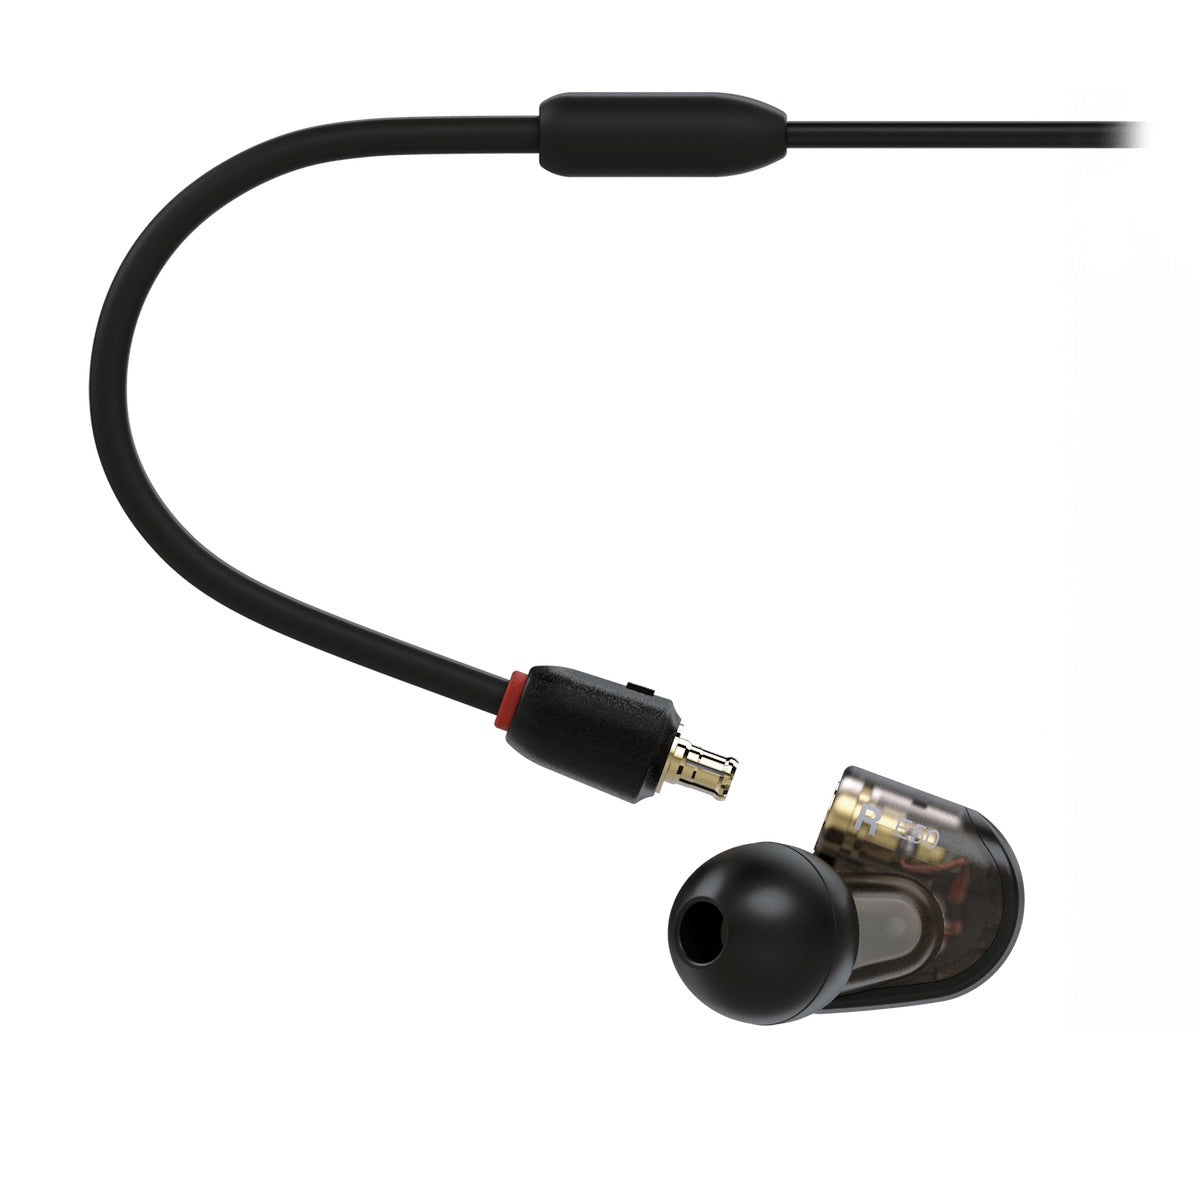 Audio-Technica ATH-E50 - Professional In-Ear Monitor Headphones, connector detail